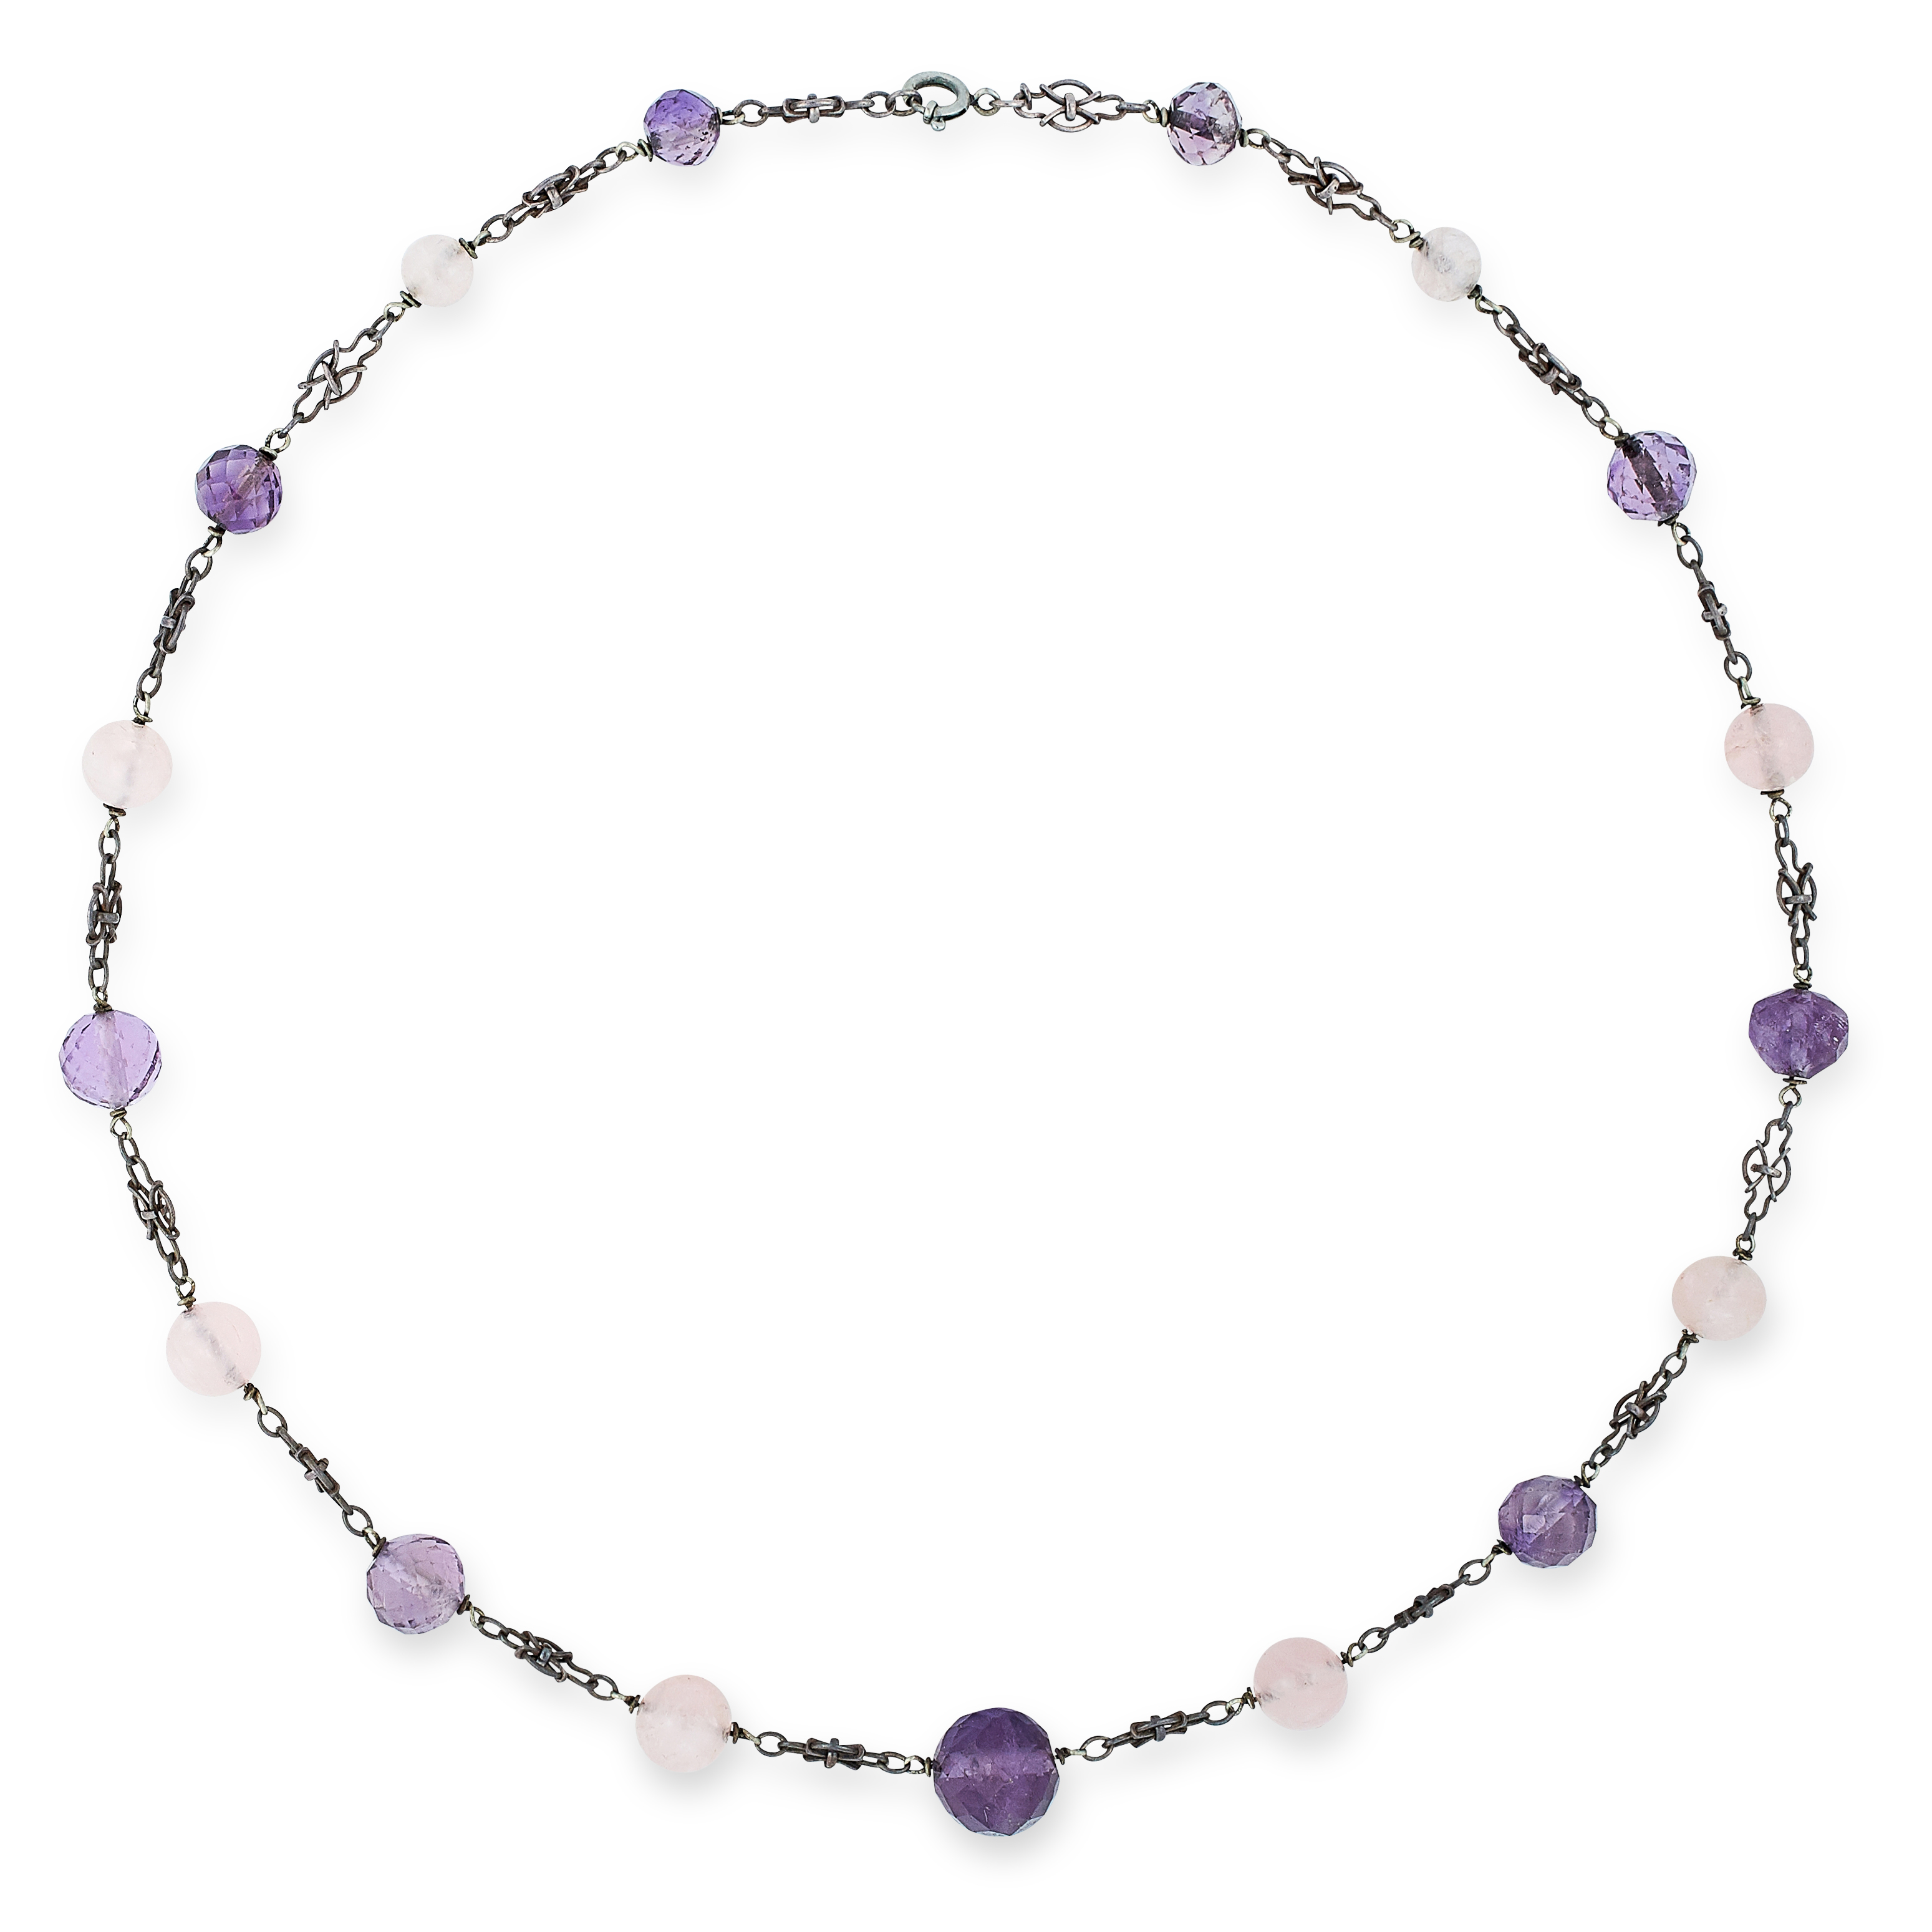 AN ARTS AND CRAFTS ROSE QUARTZ AND AMETHYST NECKLACE set with polished rose quartz and amethyst